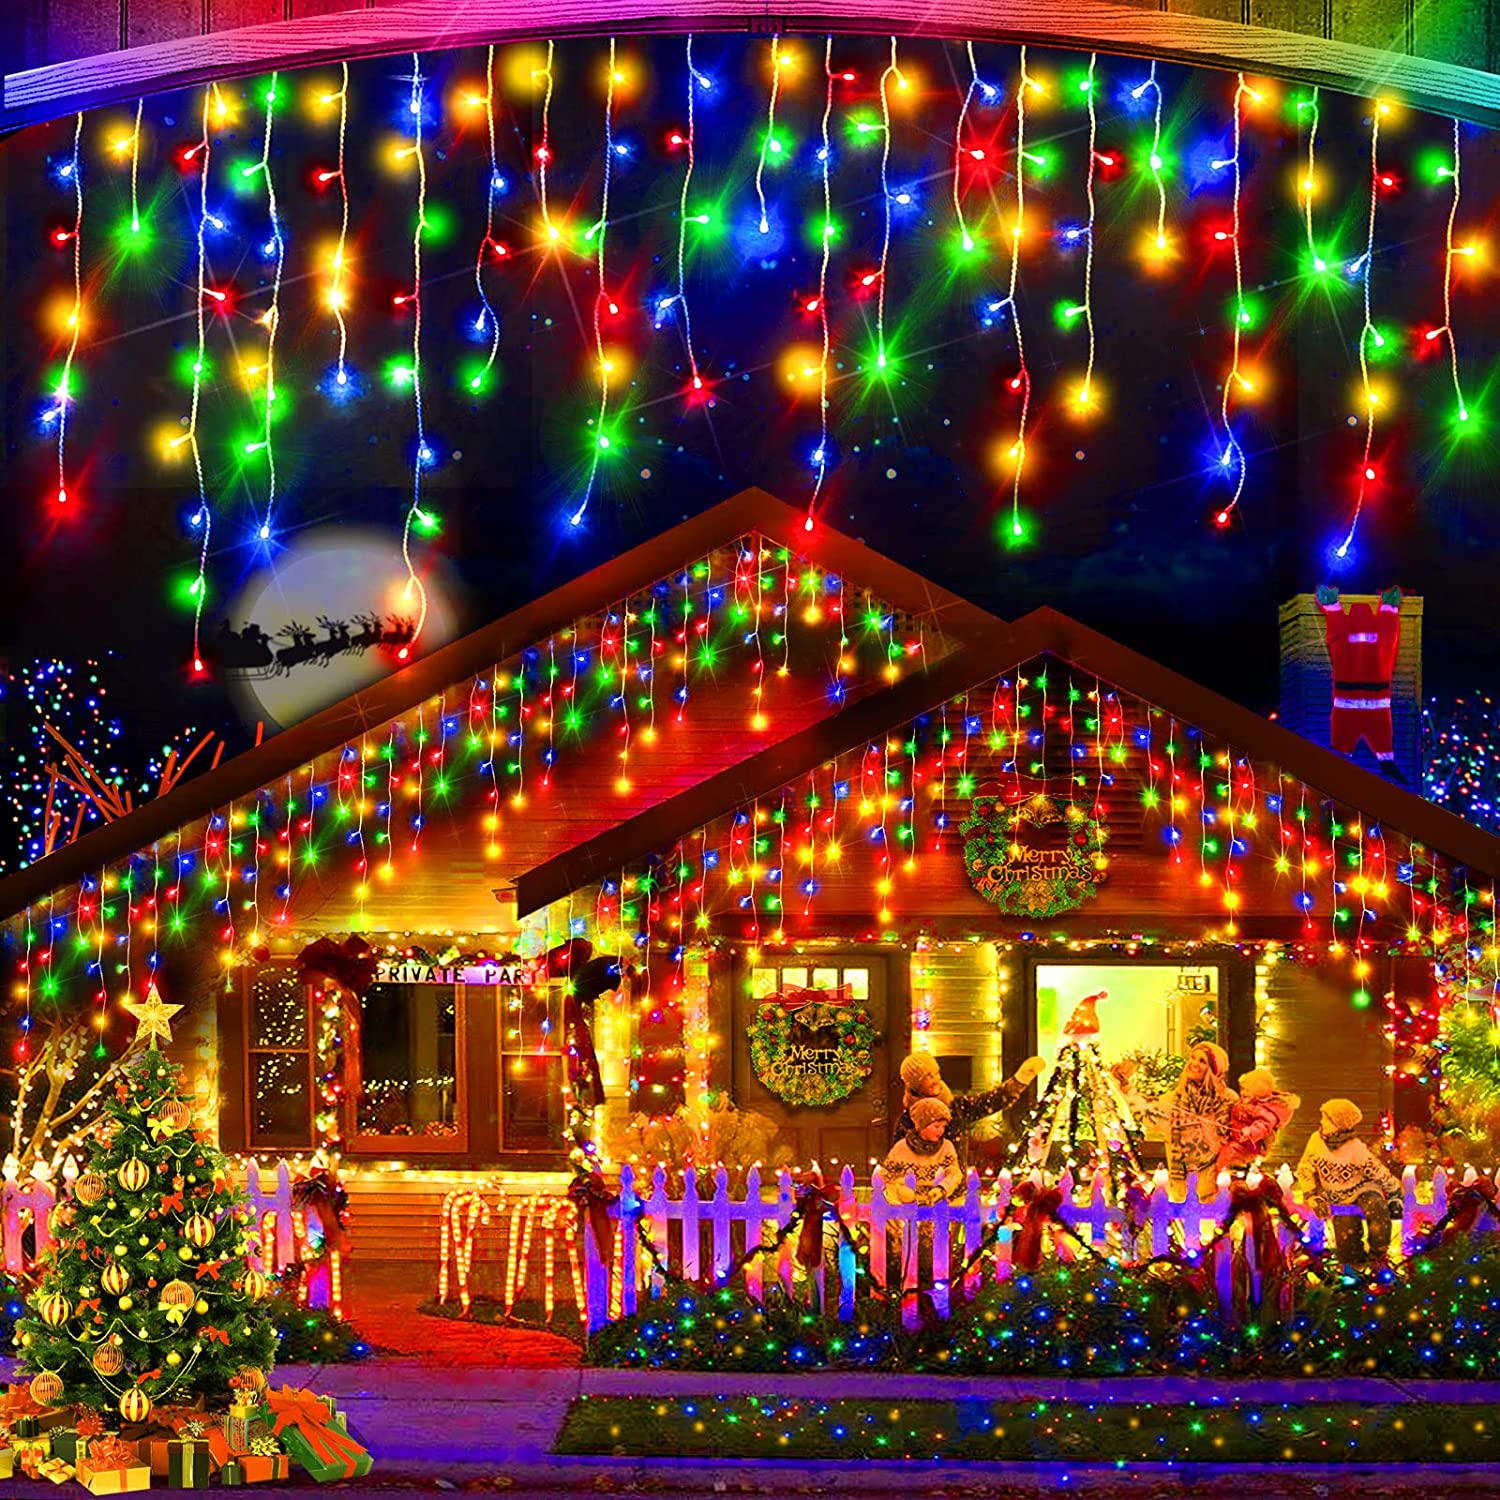 Best Christmas lights are here, must visit.